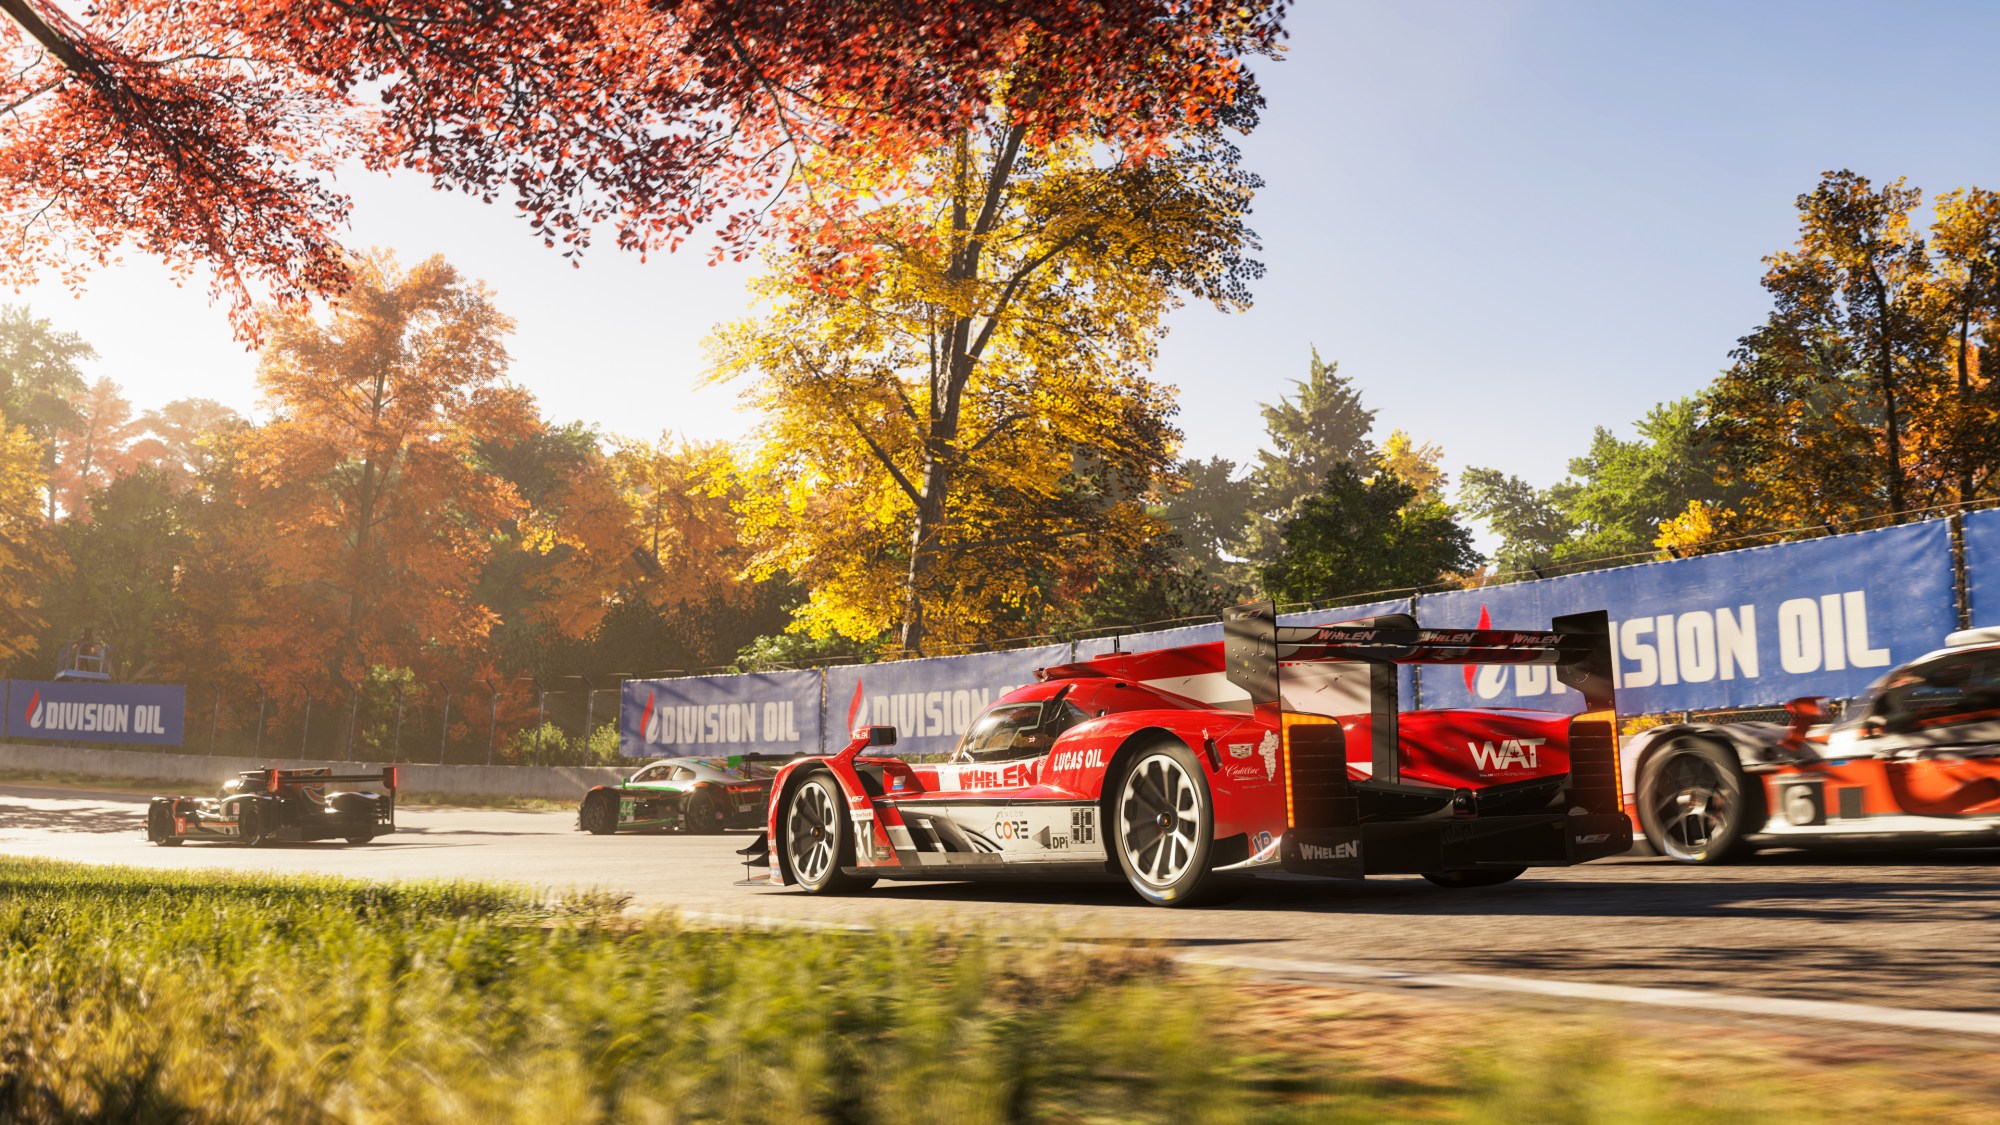 Forza Motorsport release date, gameplay, and trailers